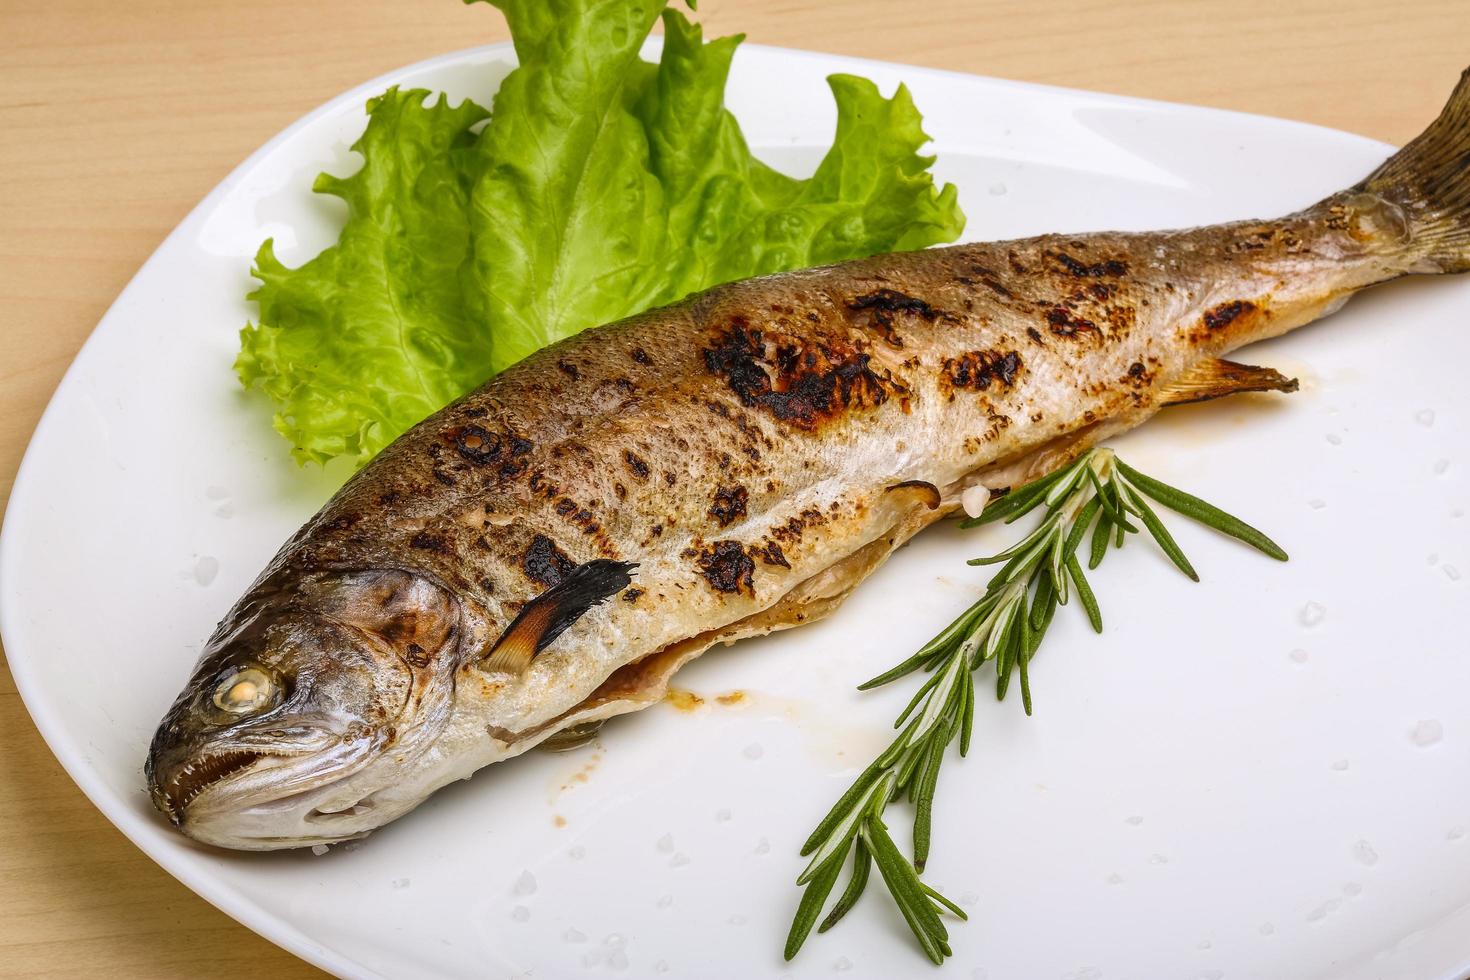 Grilled trout on the plate and wooden background photo